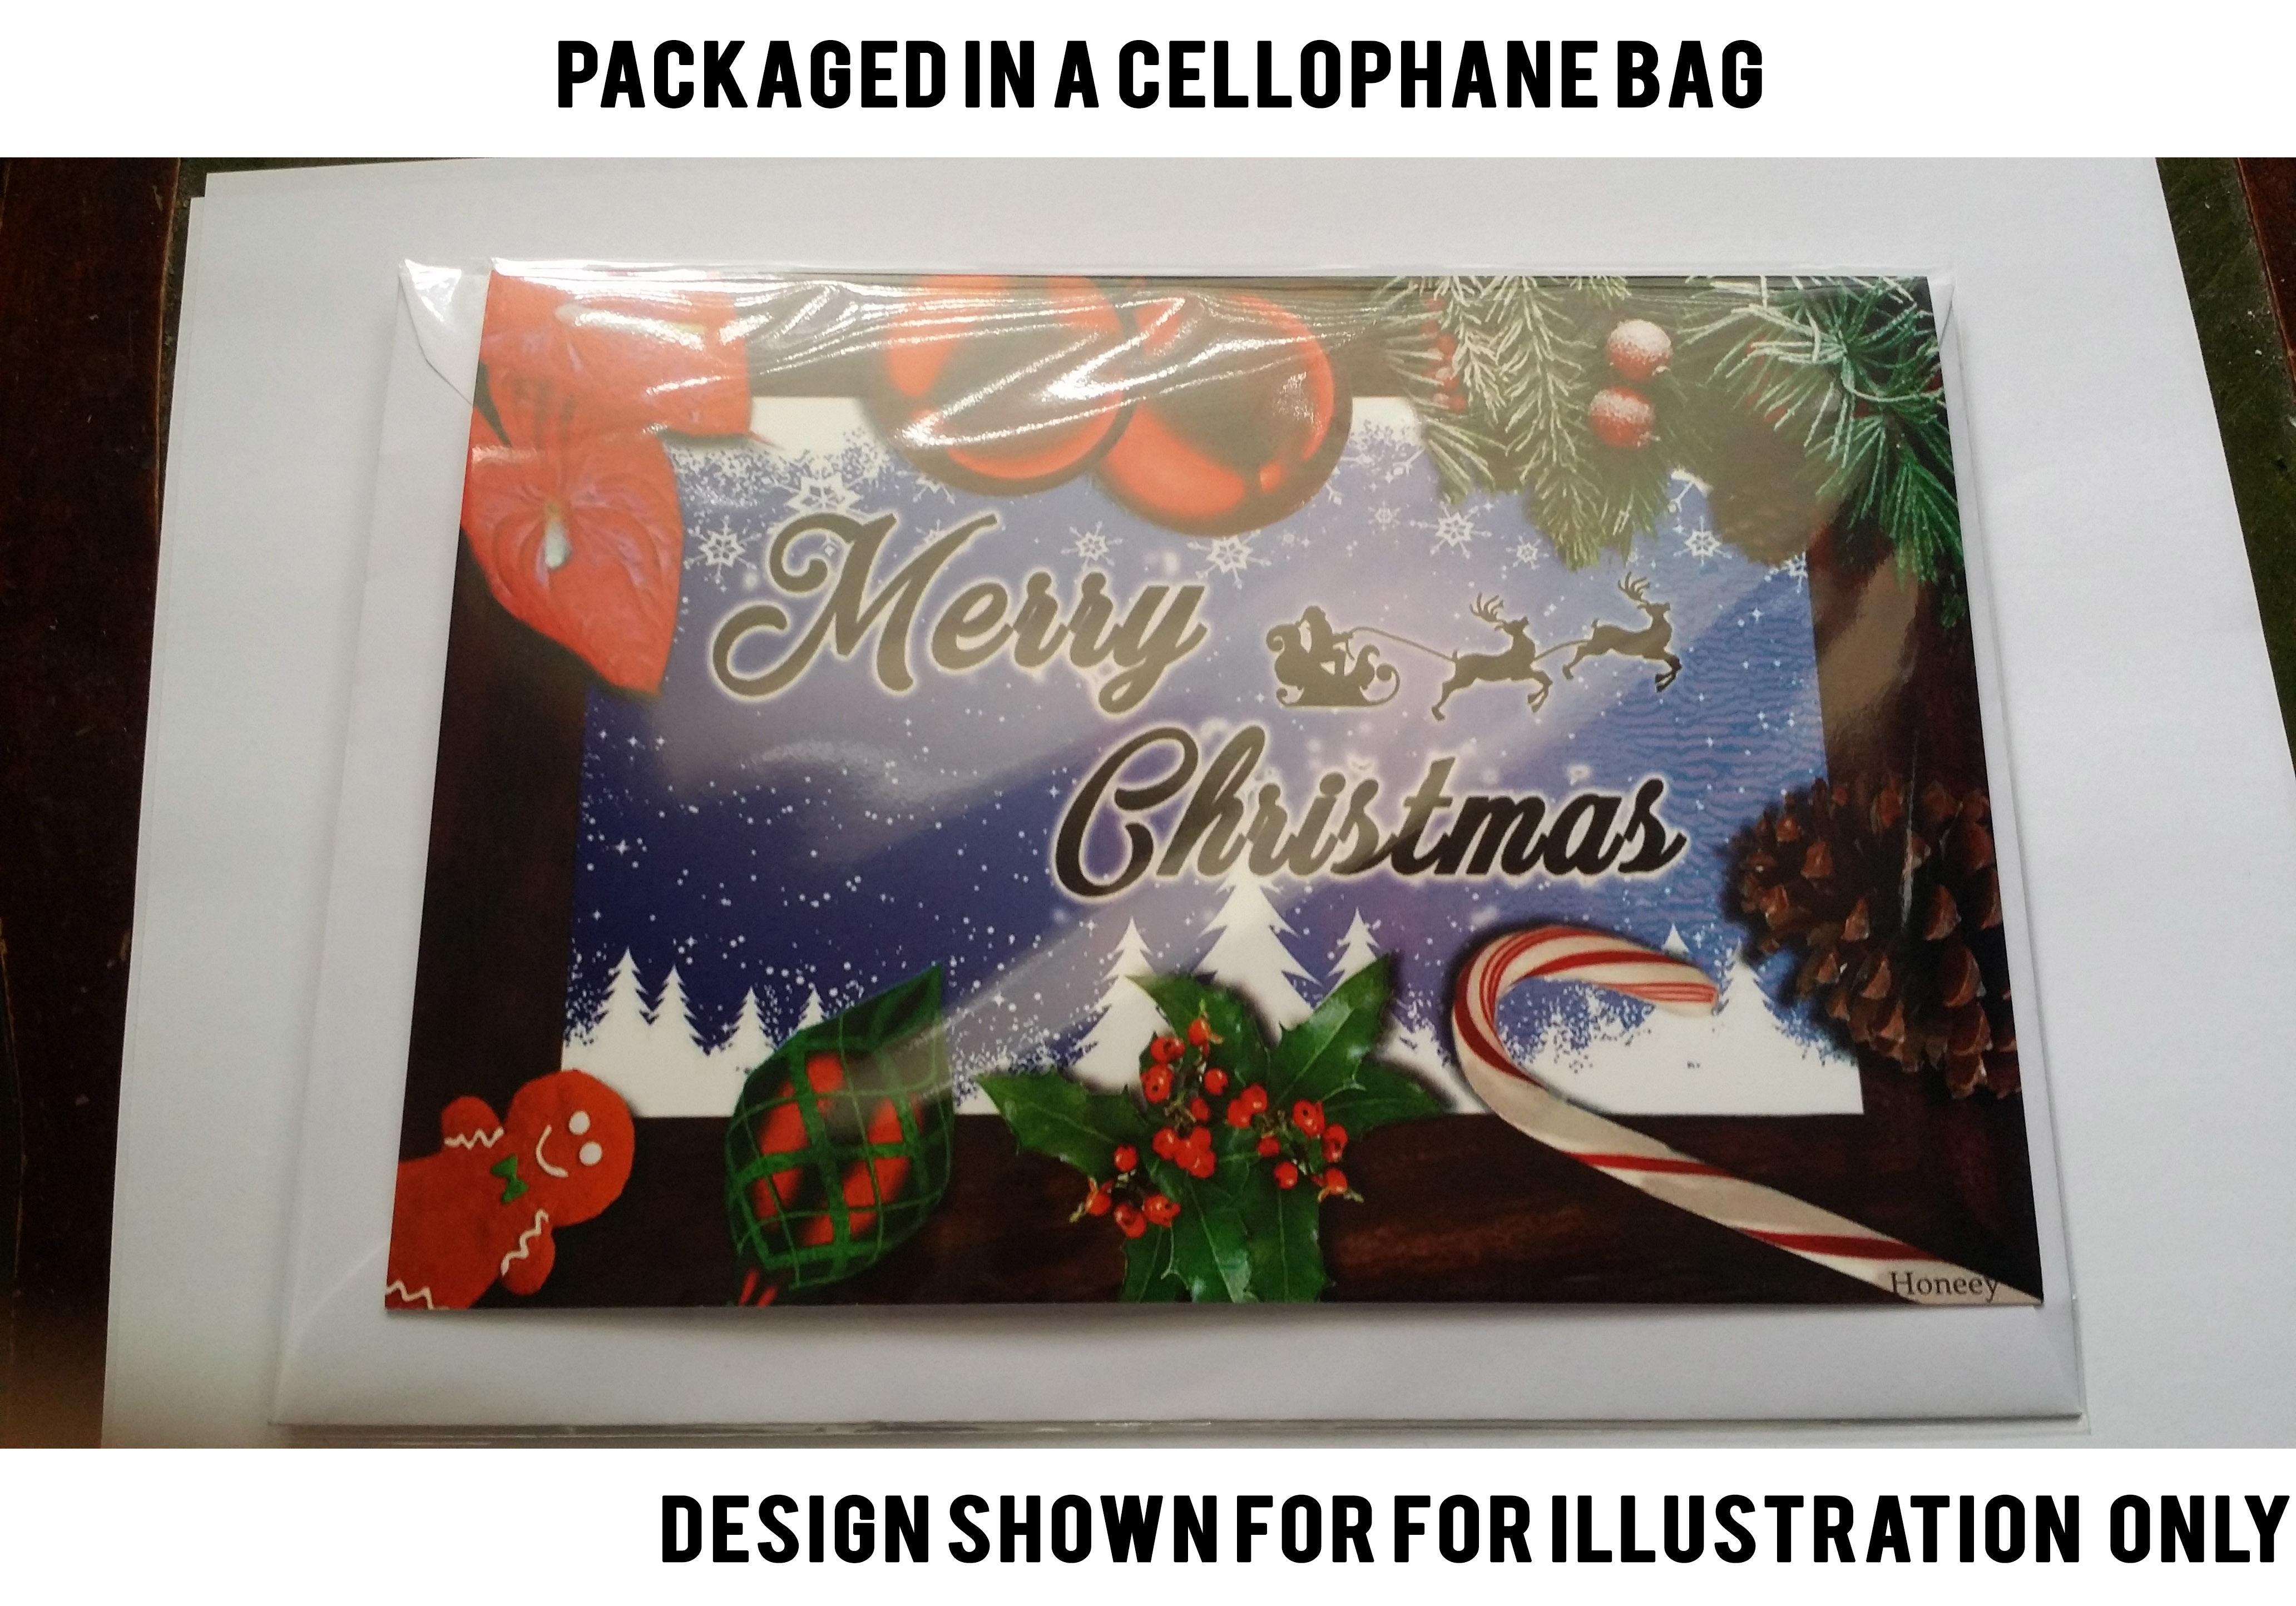 Card packaged in cellophane bag